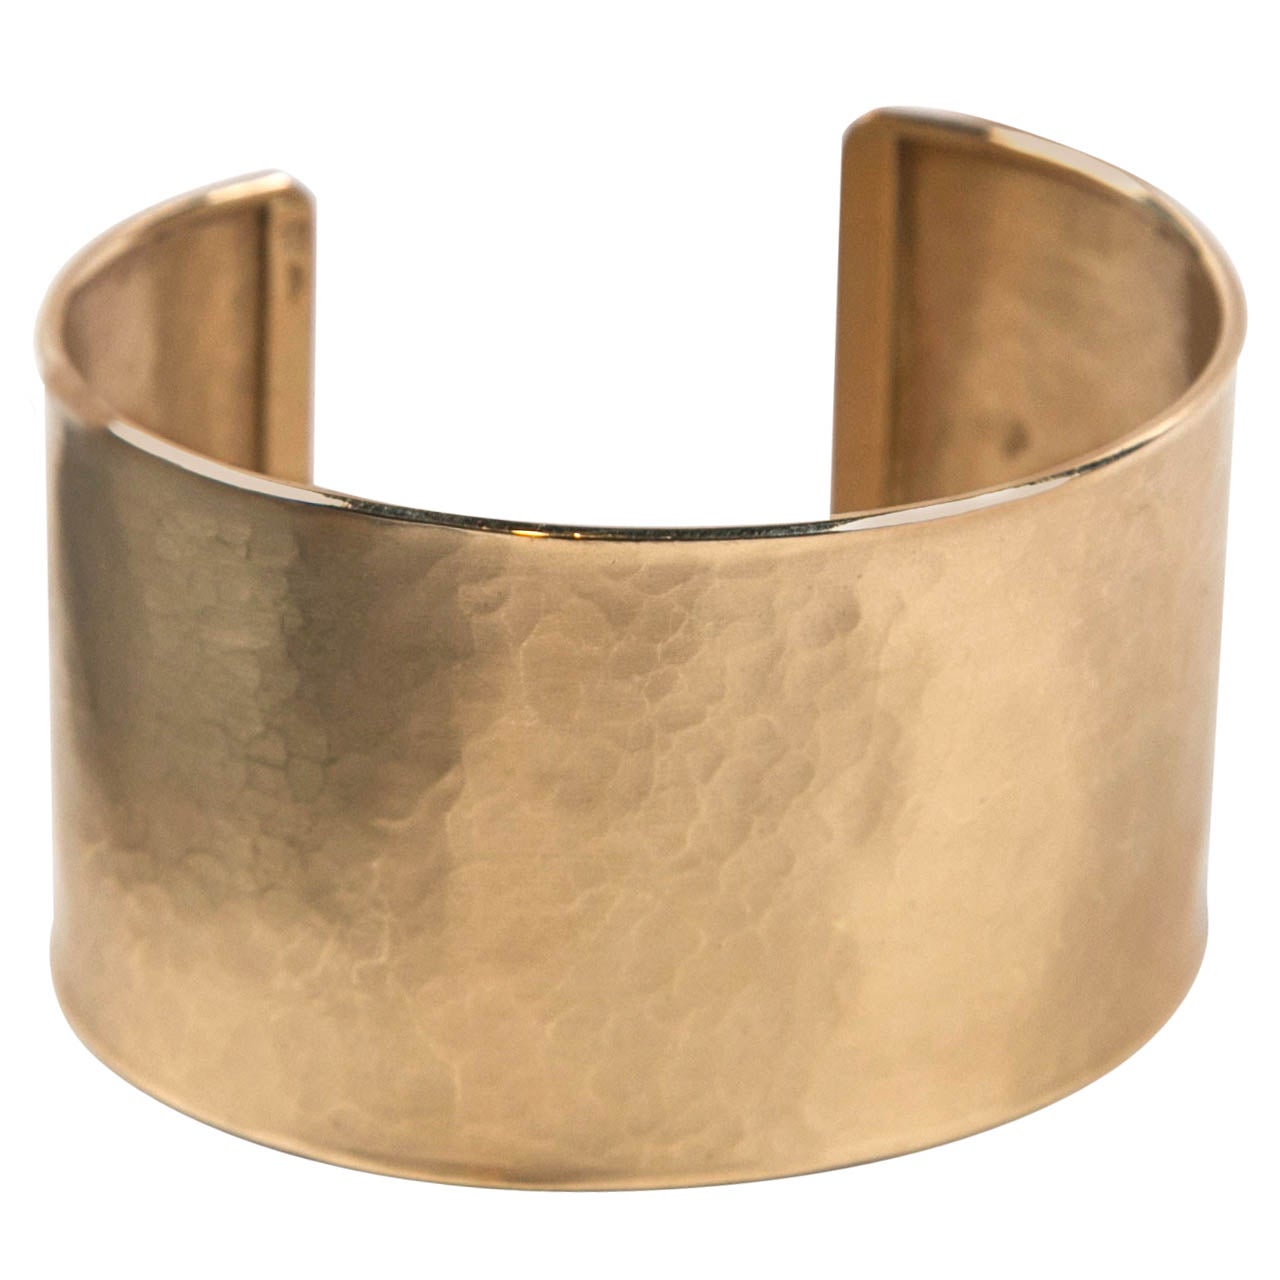 Handmade Pounded Gold Cuff Bracelet Presented by Jewelry and Such at ...